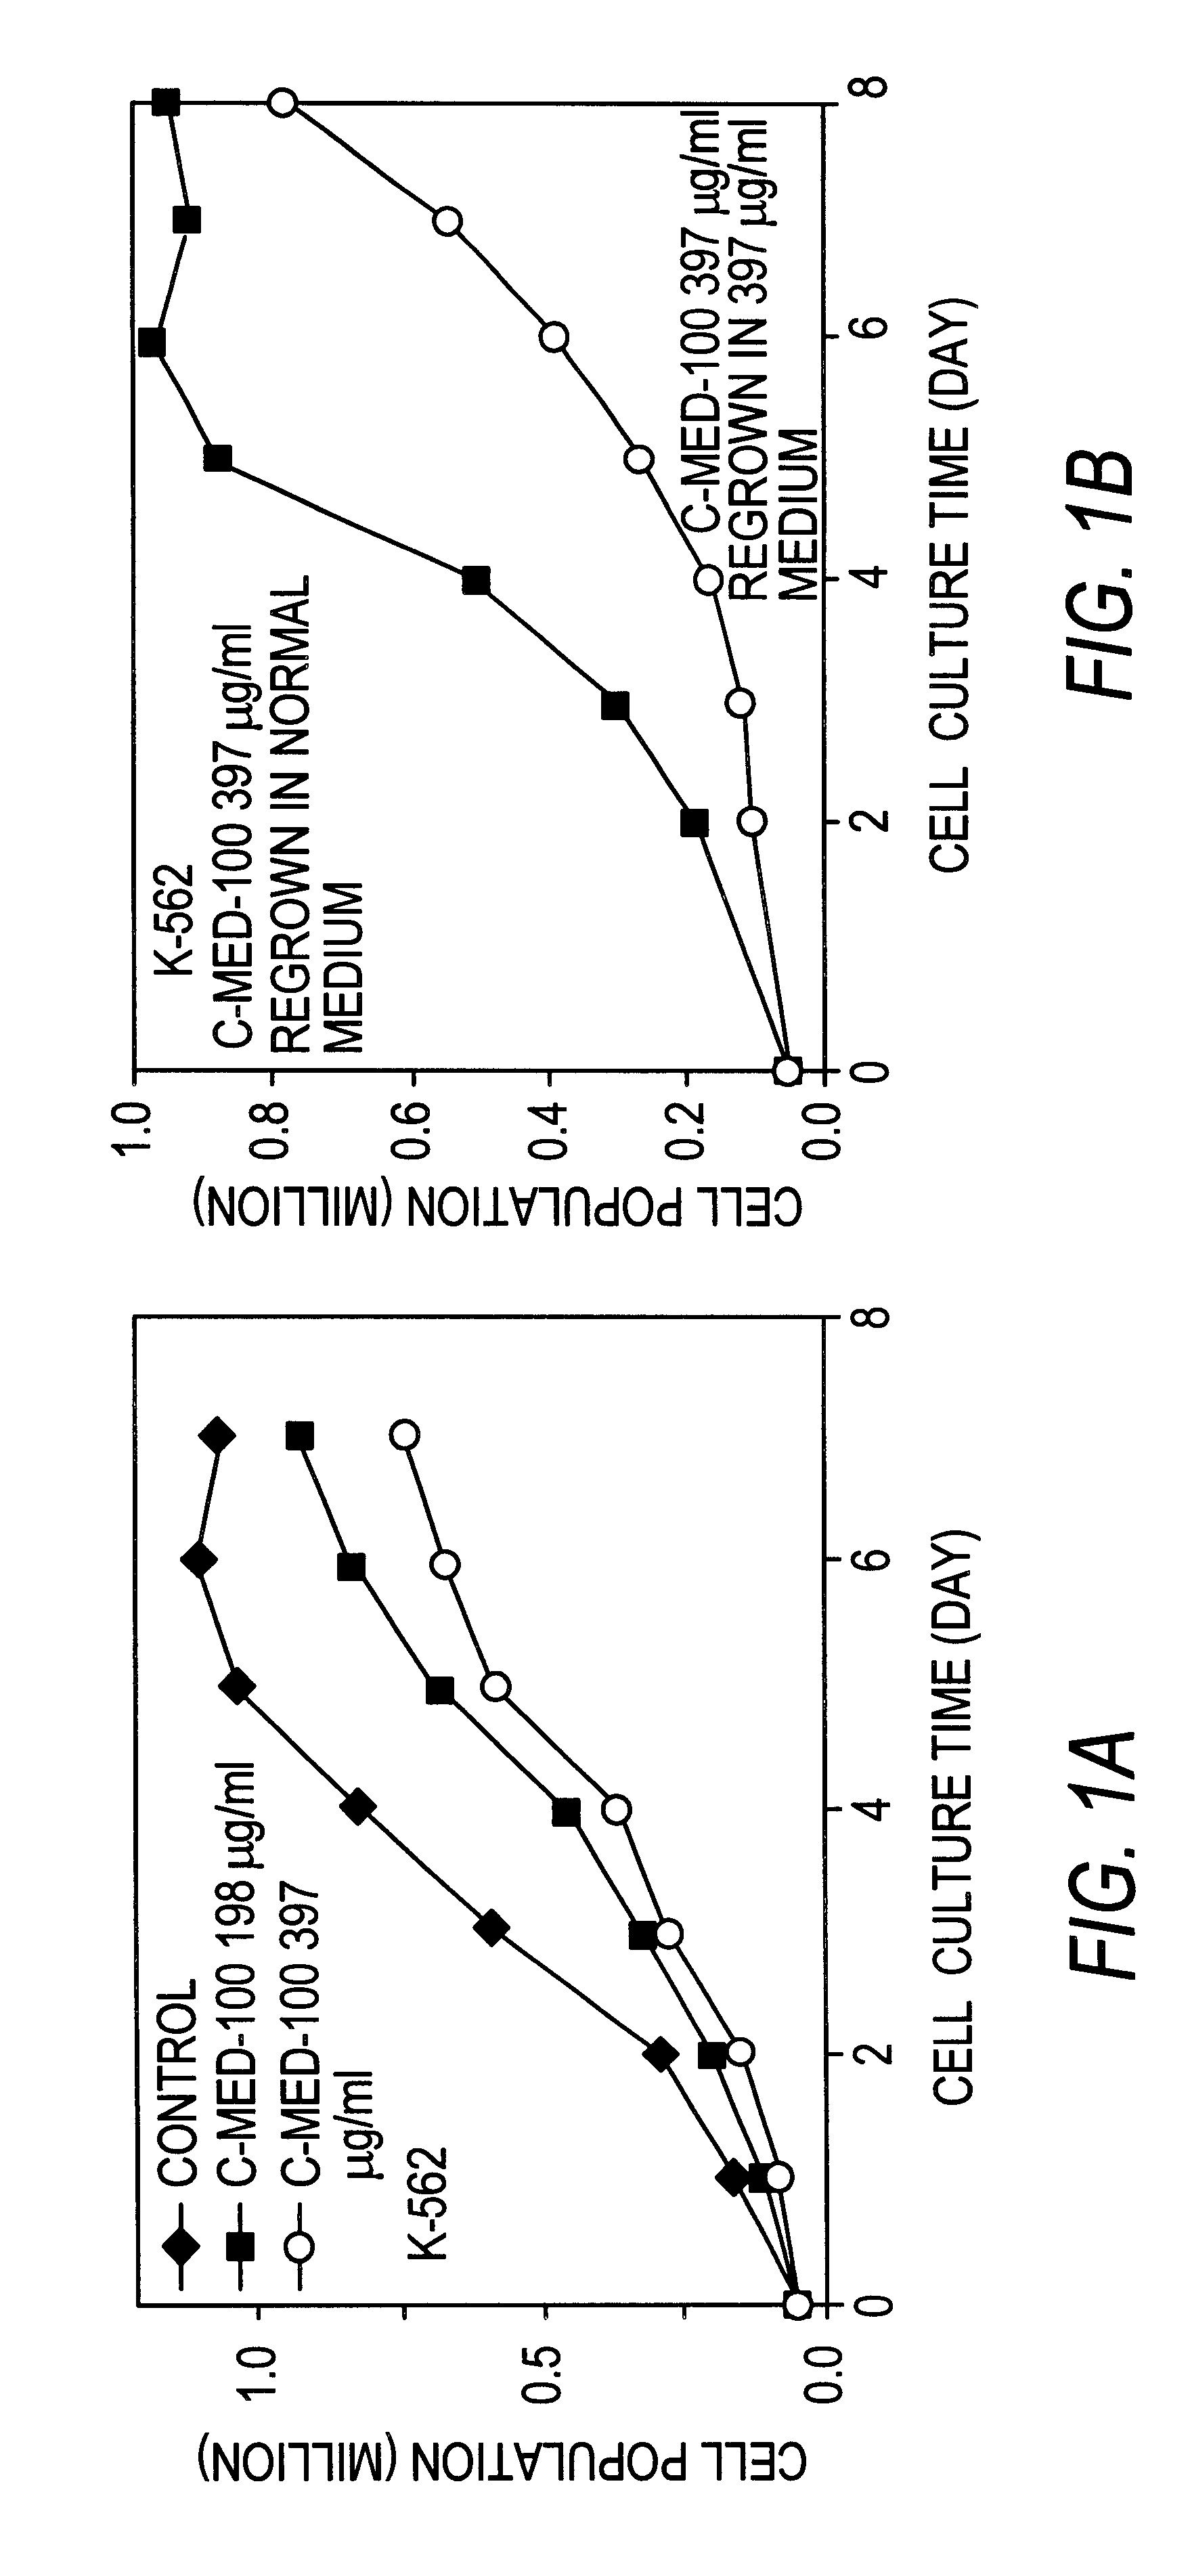 Method of preparation and composition of a water soluble extract of the plant species Uncaria for enhancing immune, anti-inflammatory and anti-tumor processes of warm blooded animals